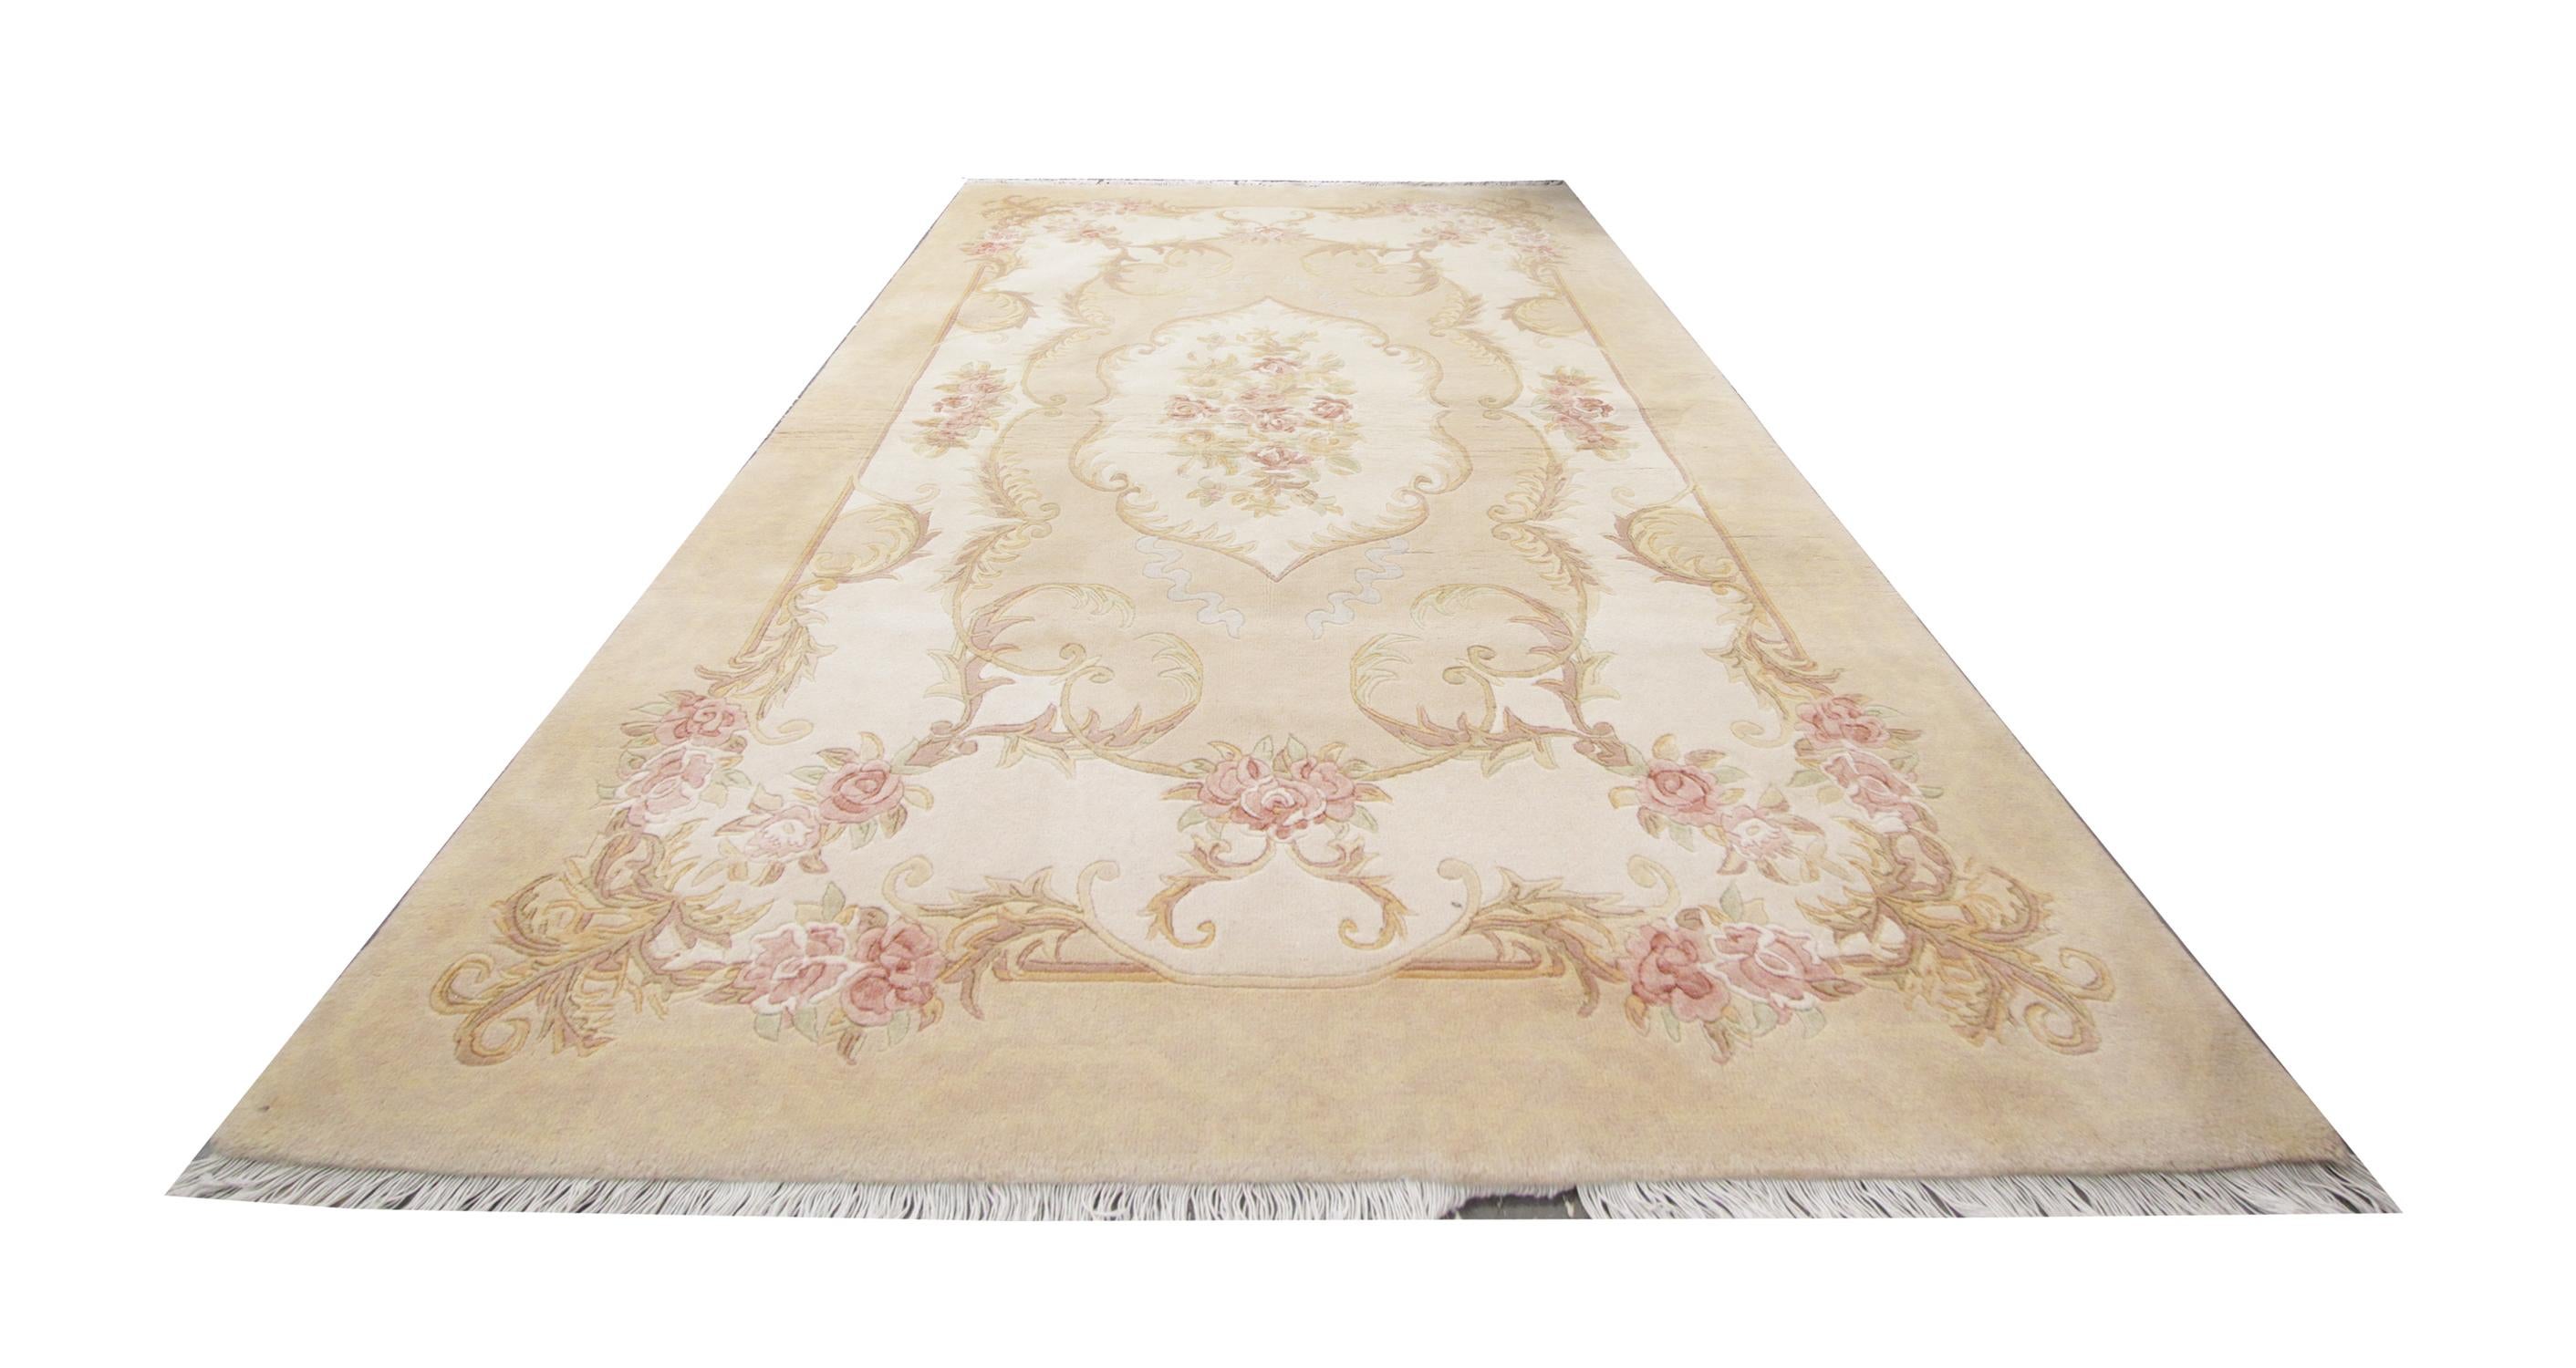 This wool rug is one of the unusual oriental rugs of the 1970s which are Art Deco rugs in the excellent condition with Cream background color contrasting the stylish border and the motives. This patterned rug is a combination of a floral rug and